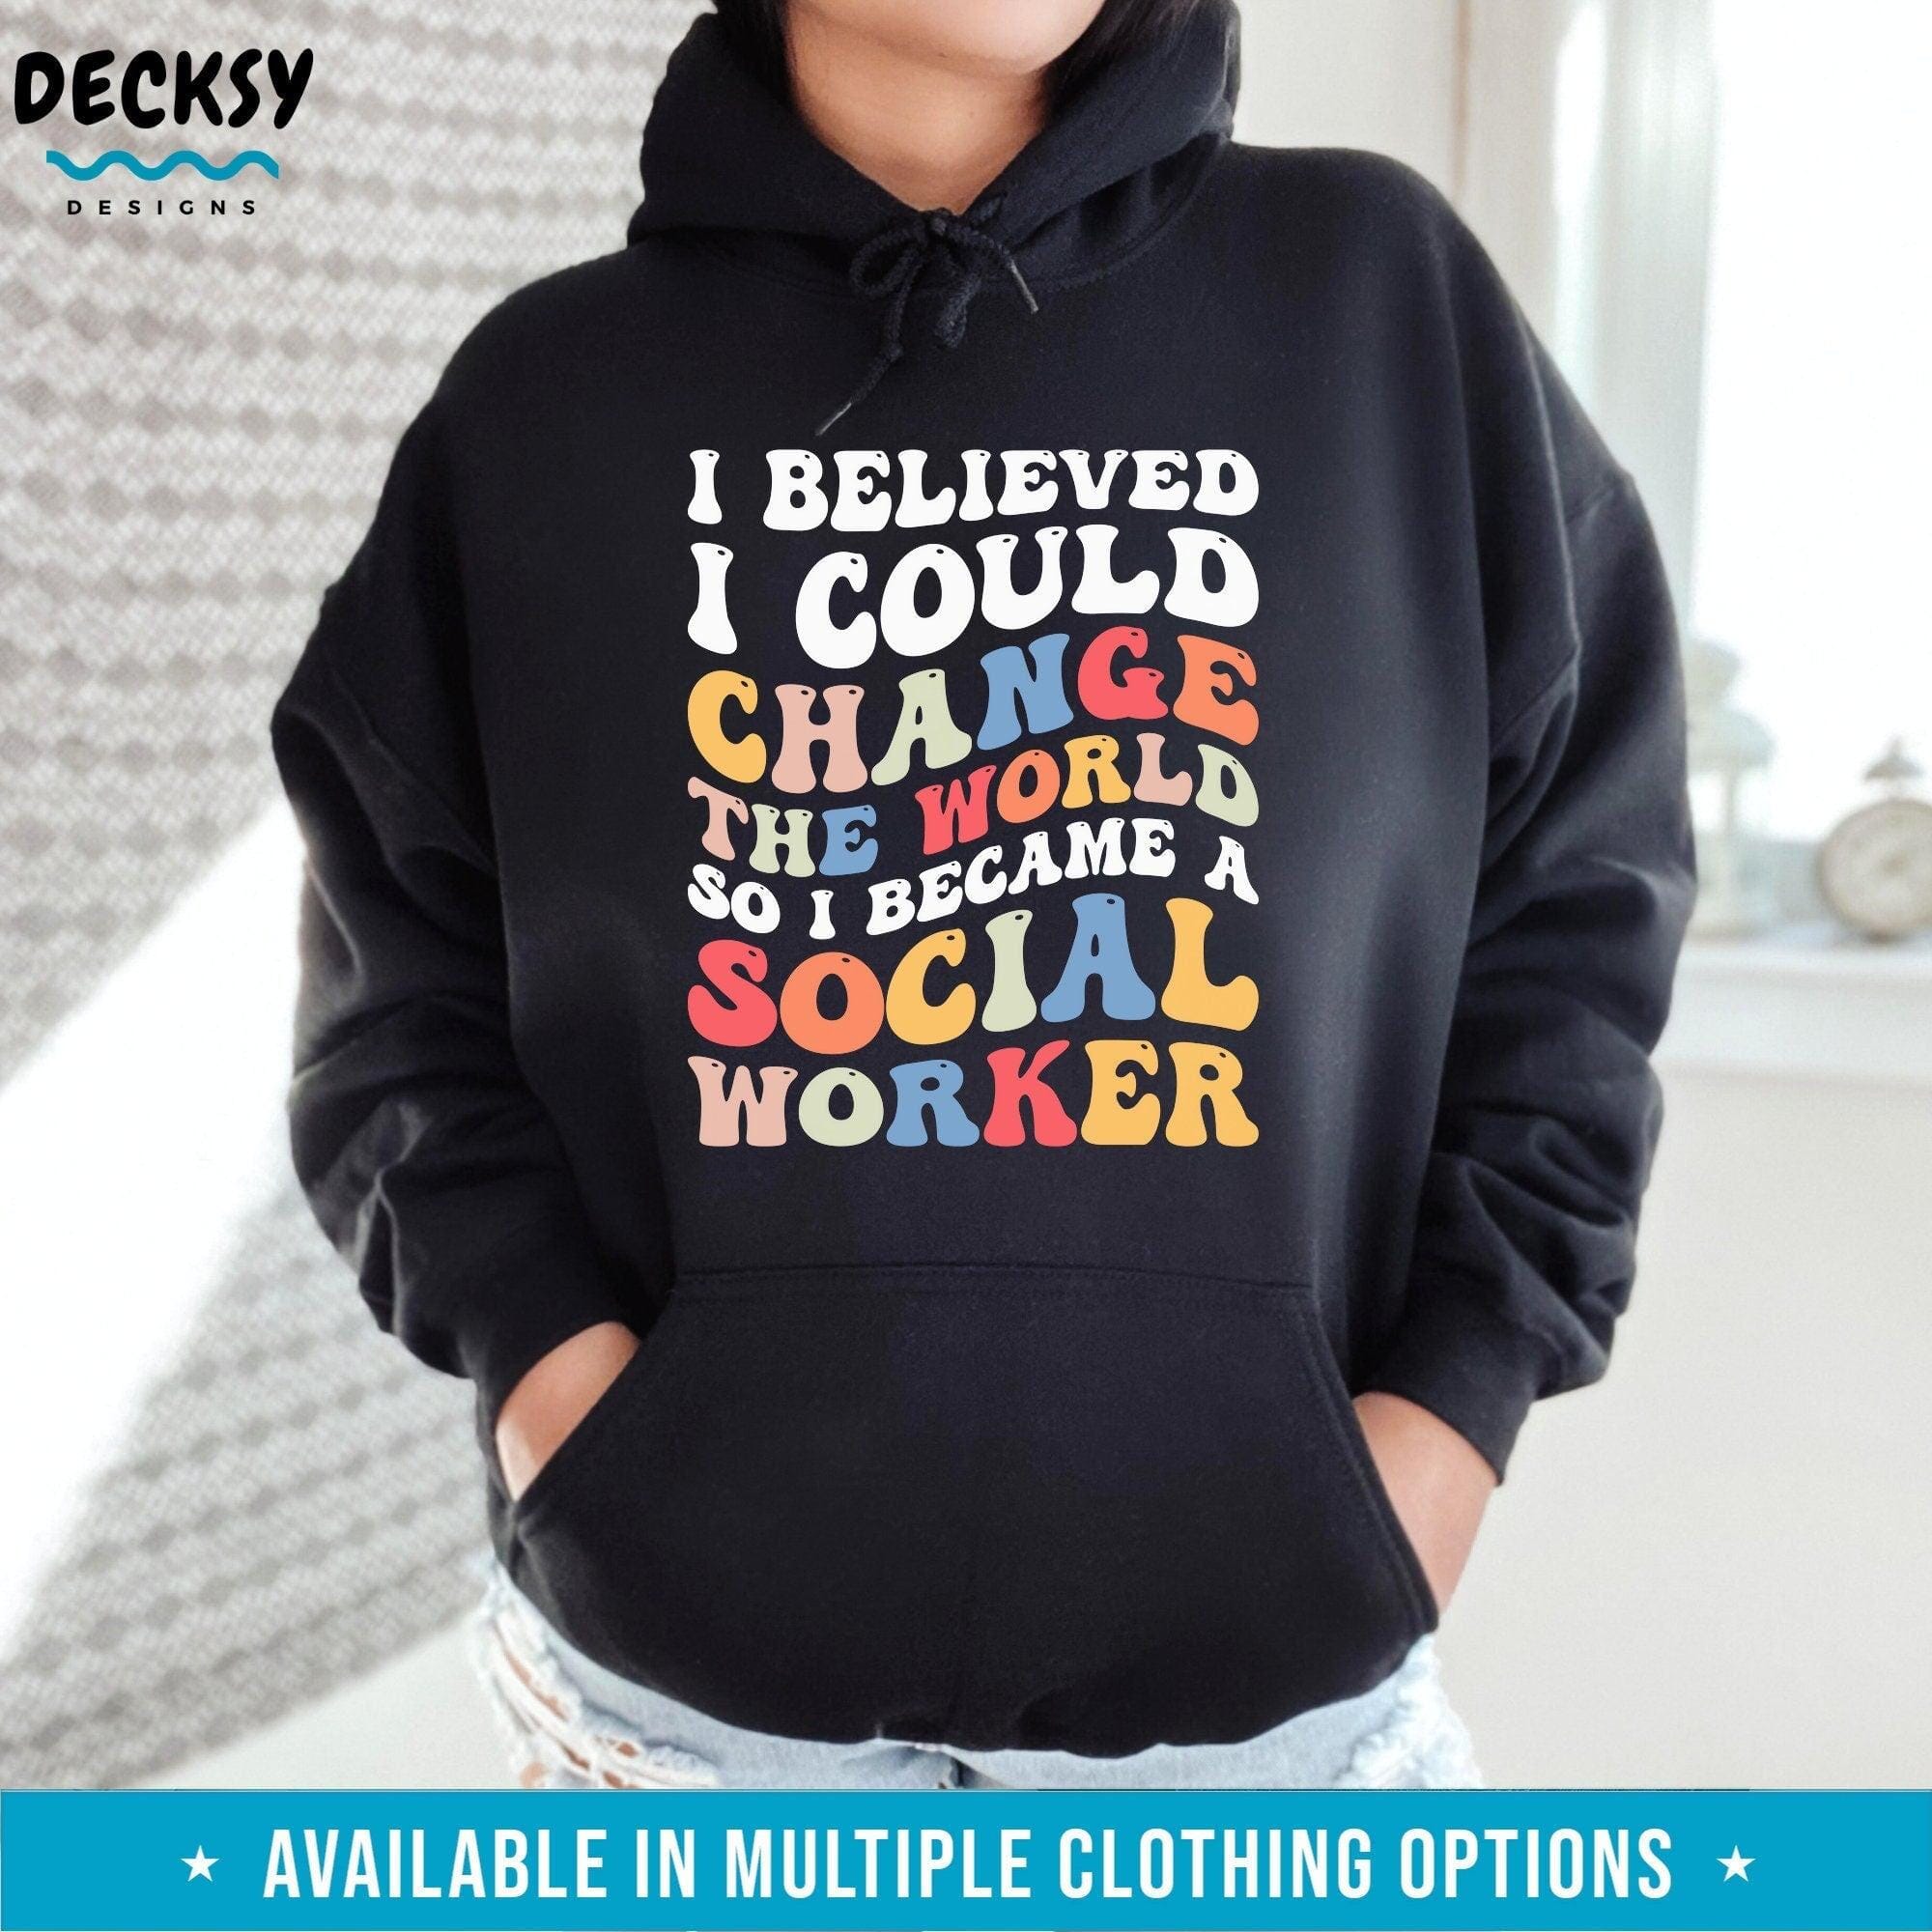 Social Worker Shirt, Social Work Gift-Clothing:Gender-Neutral Adult Clothing:Tops & Tees:T-shirts:Graphic Tees-DecksyDesigns